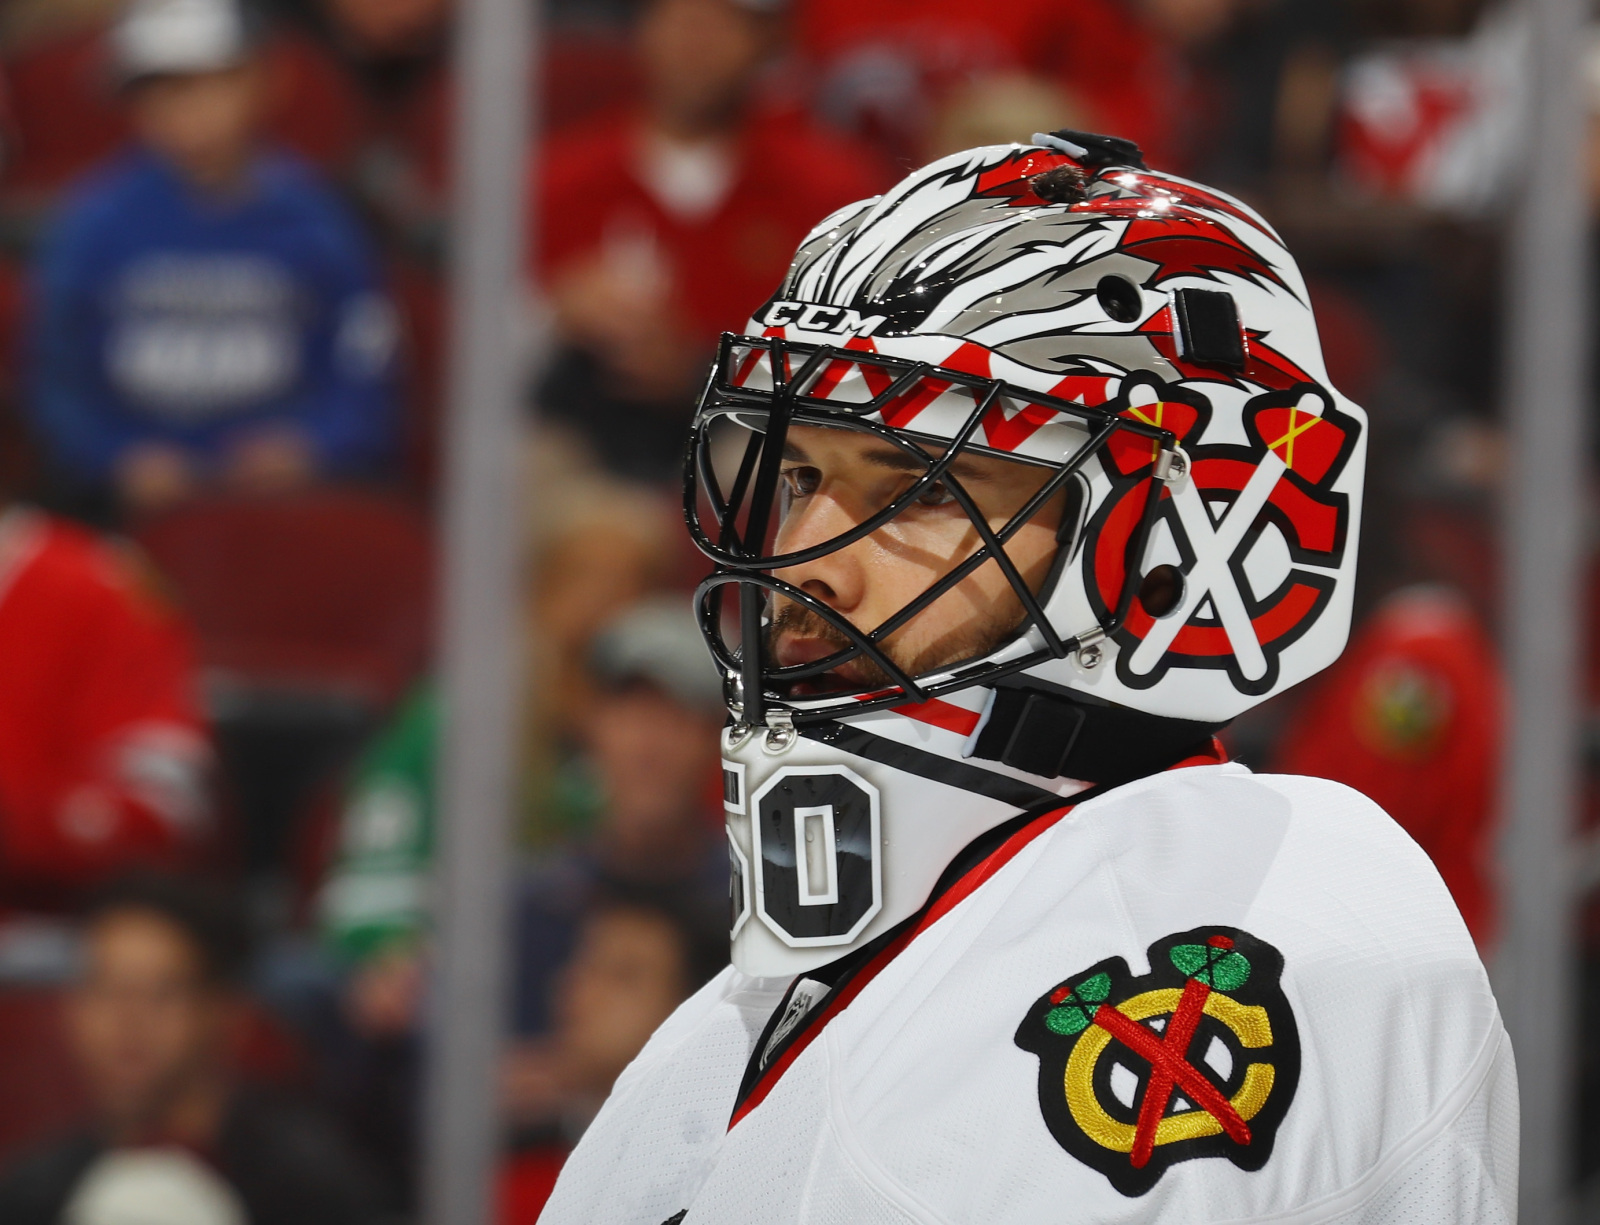 New Jersey Devils: Grading the Corey Crawford signing